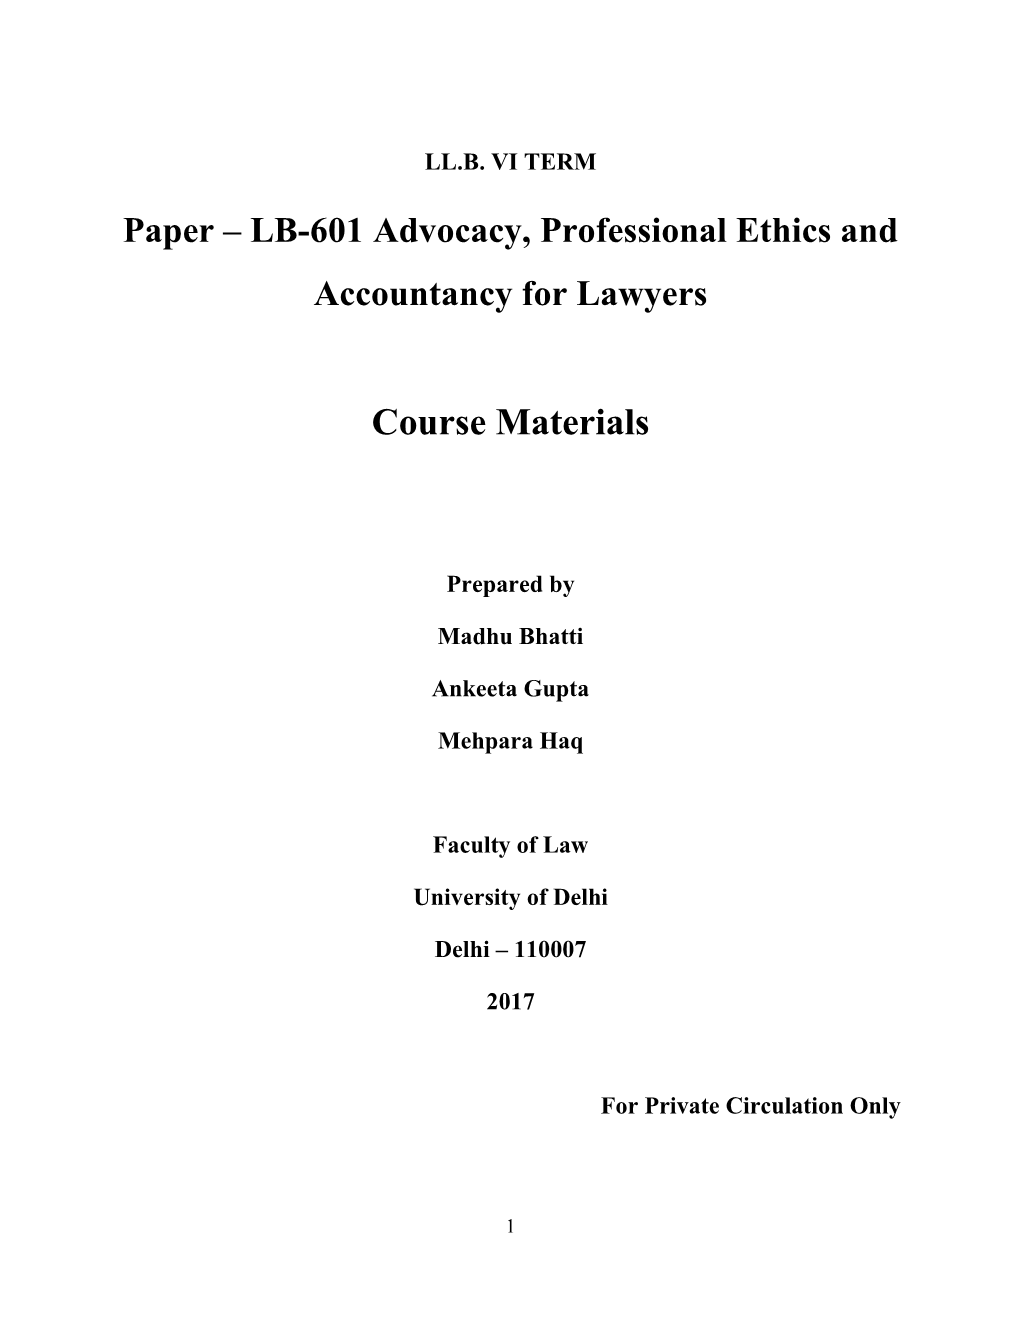 Paper – LB-601 Advocacy, Professional Ethics and Accountancy for Lawyers